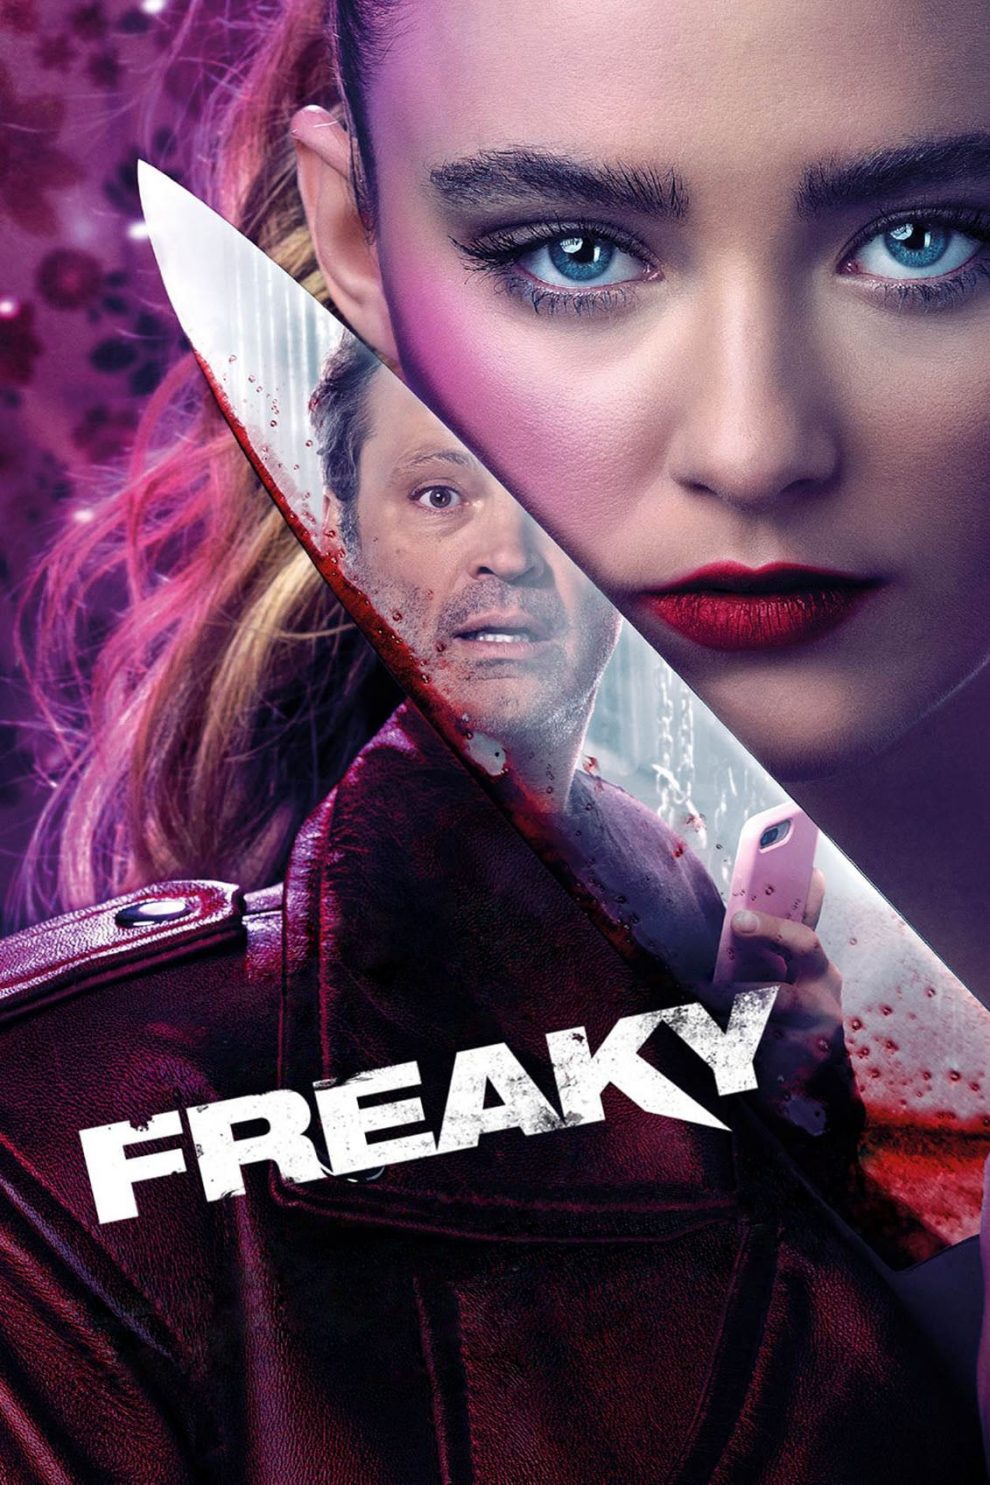 Poster for the movie "Freaky"